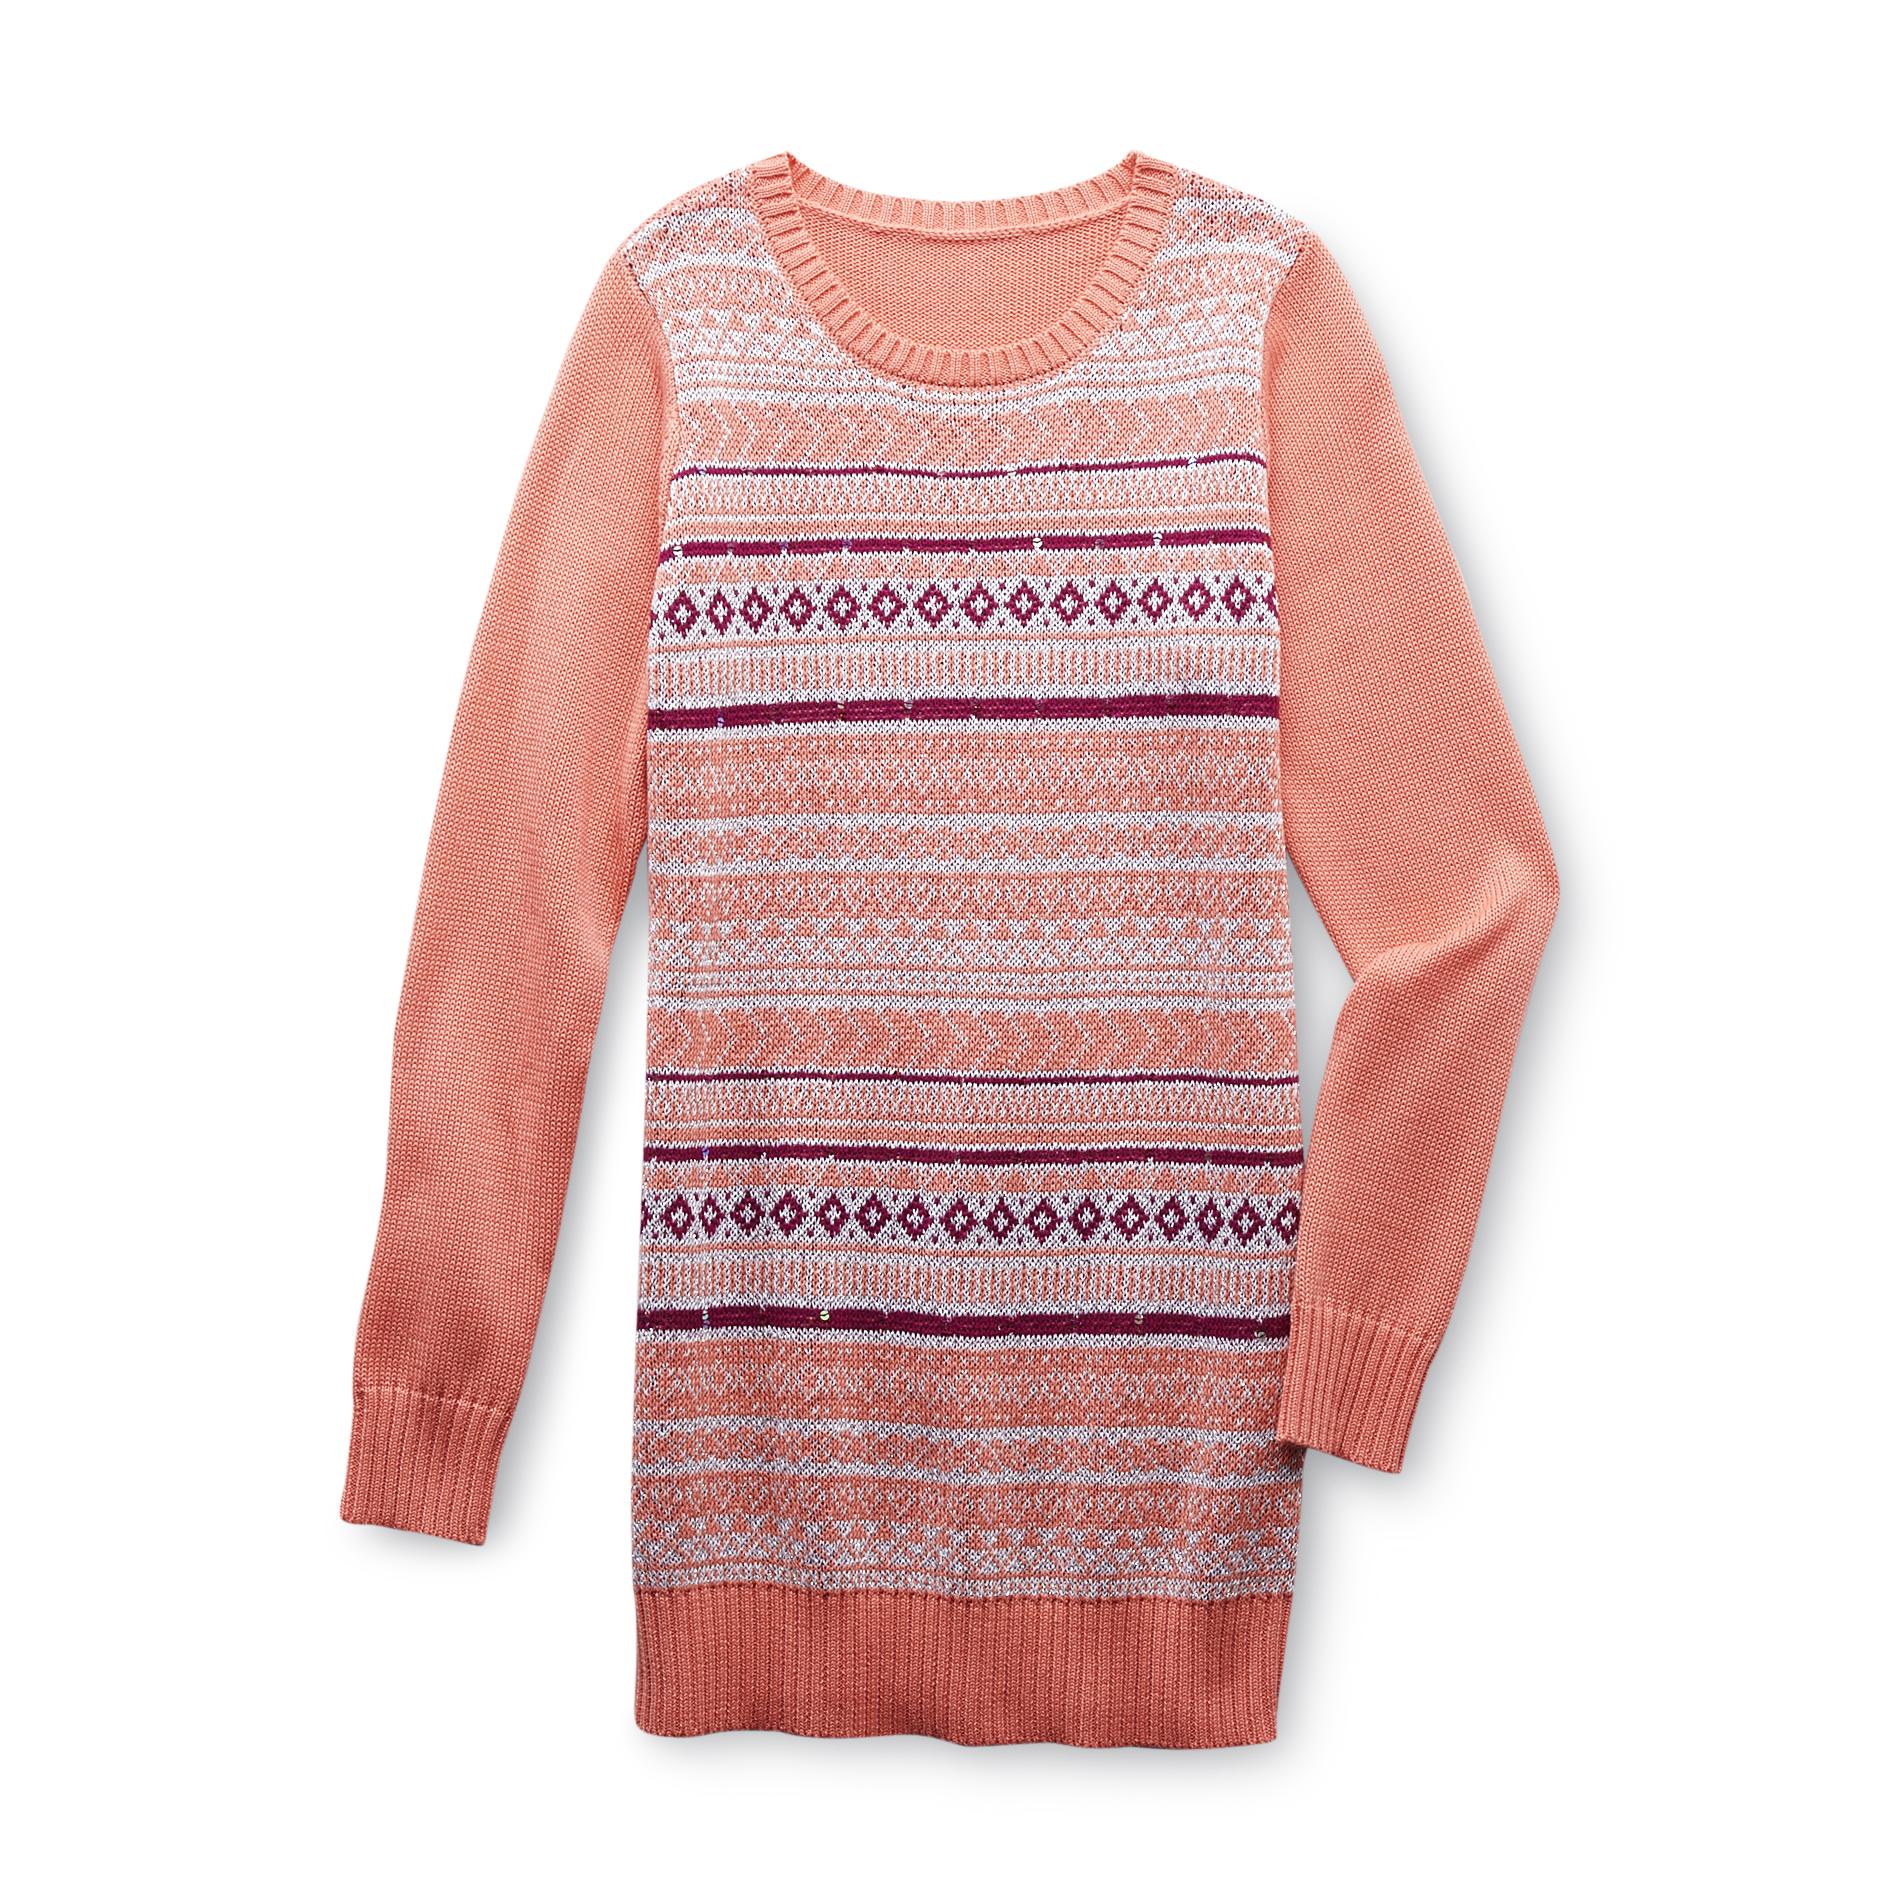 Route 66 Girl's Embellished Tunic Sweater - Fair Isle